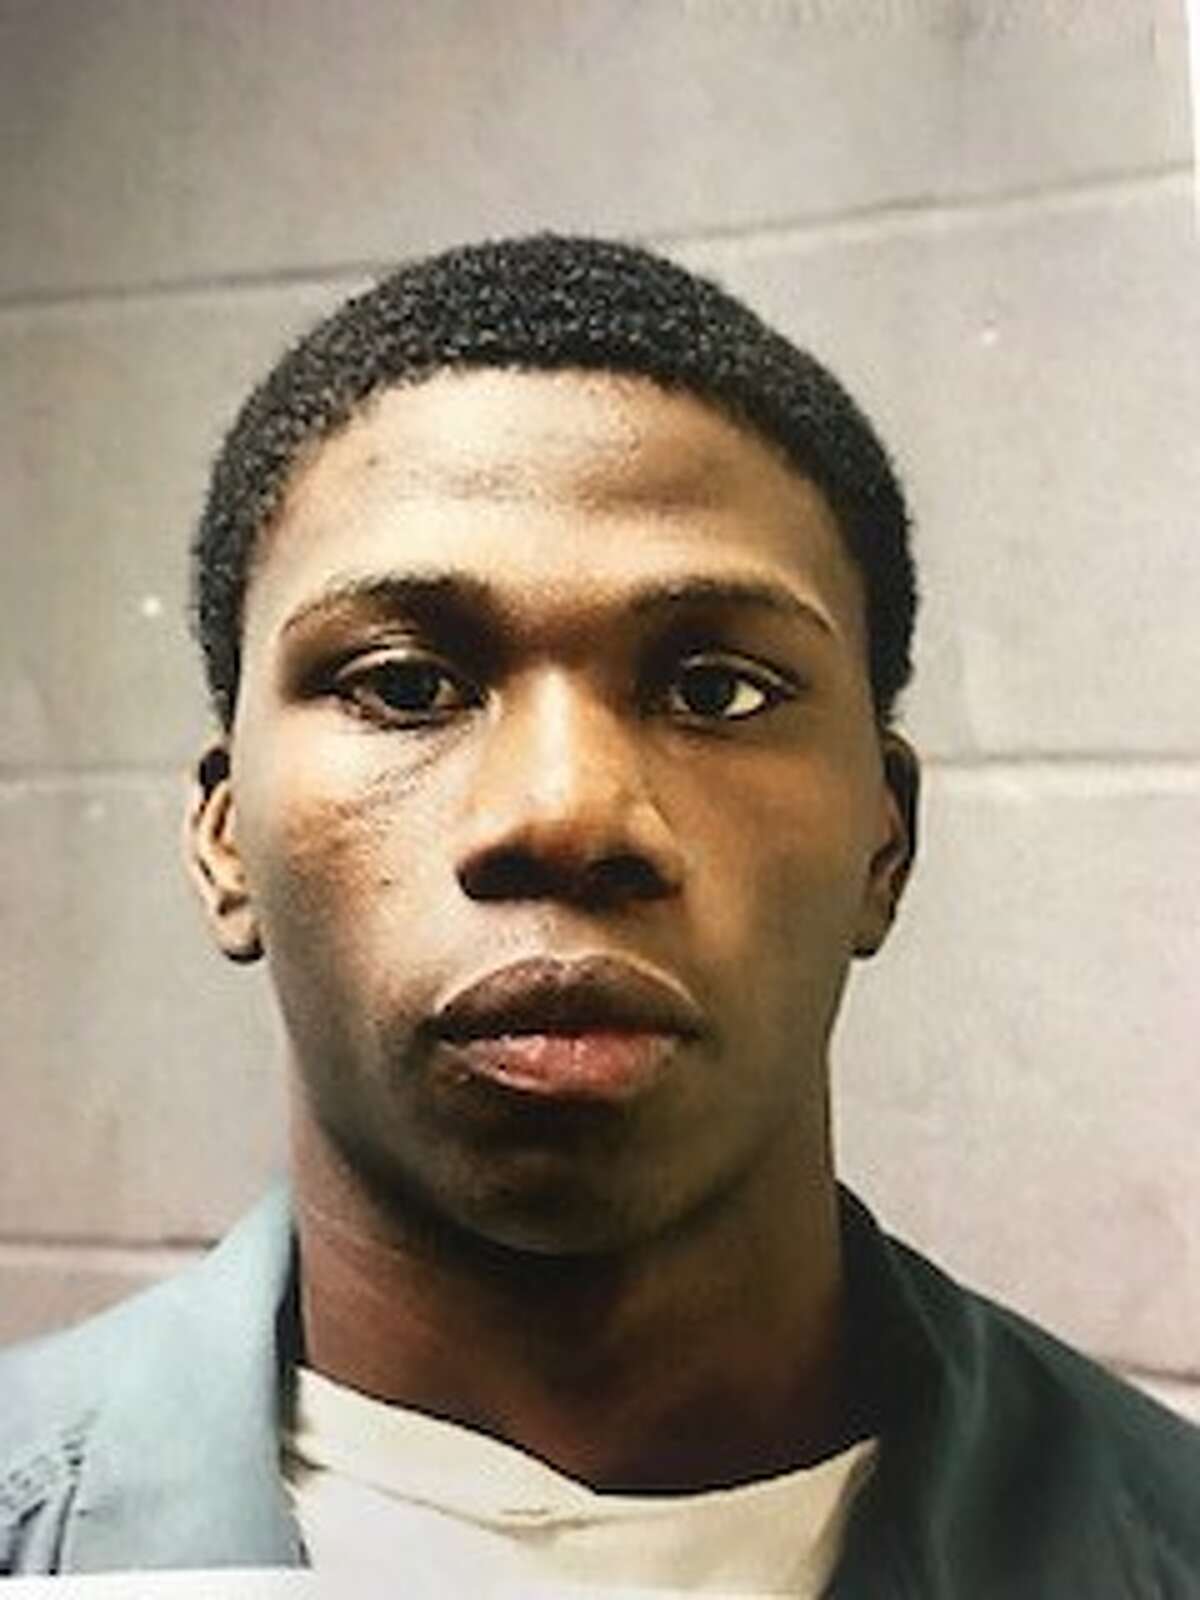 Authorities have arrested Jalin Damone Charles, 18, after a deadly shooting about 9:30 p.m. Friday on Scott near Luca.